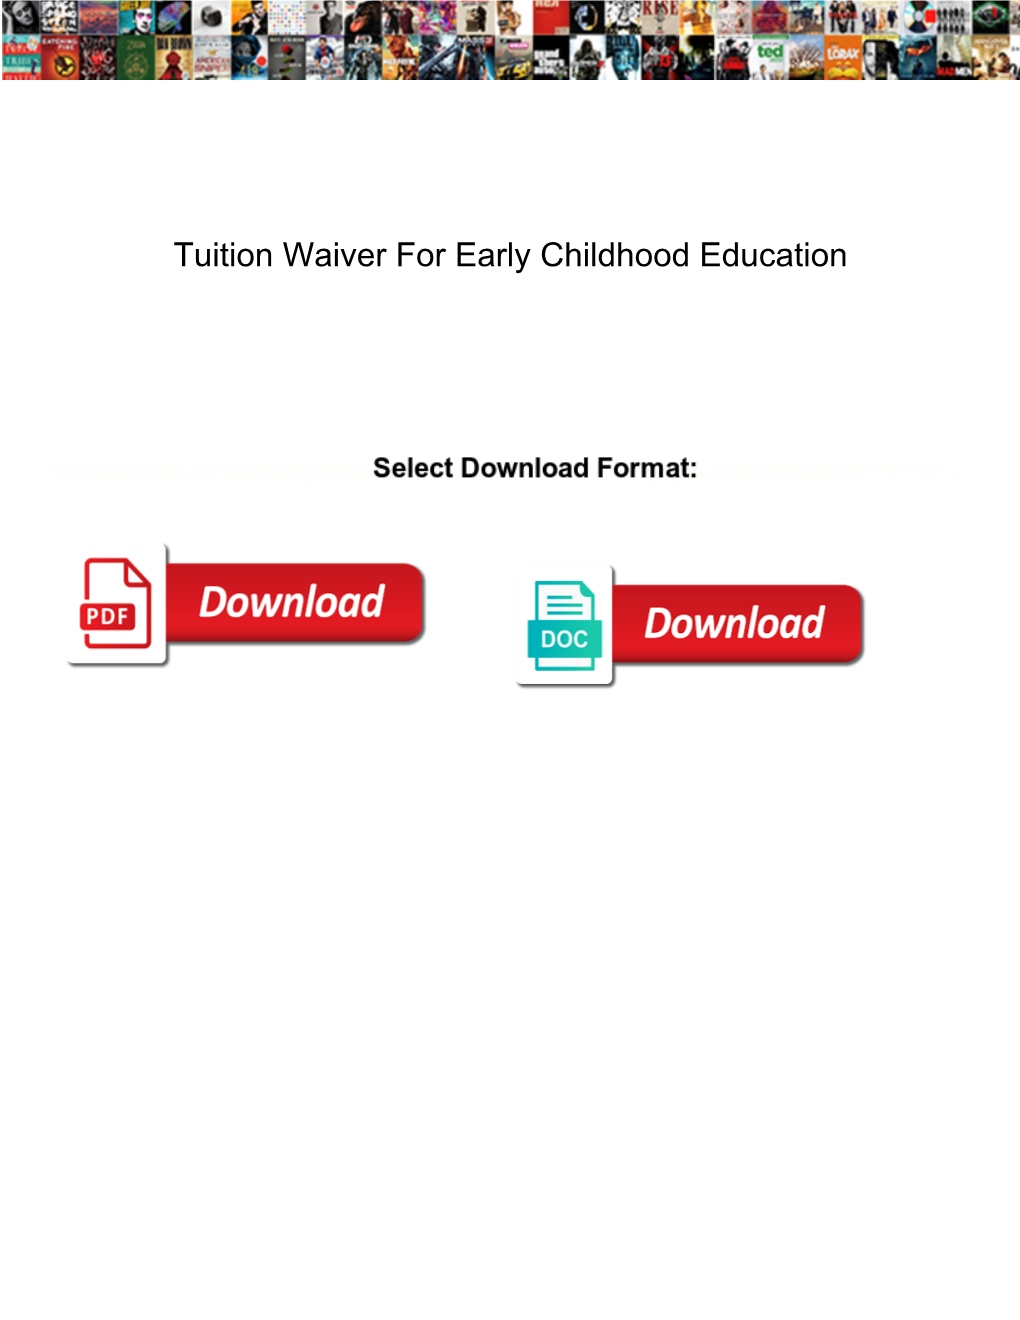 Tuition Waiver for Early Childhood Education